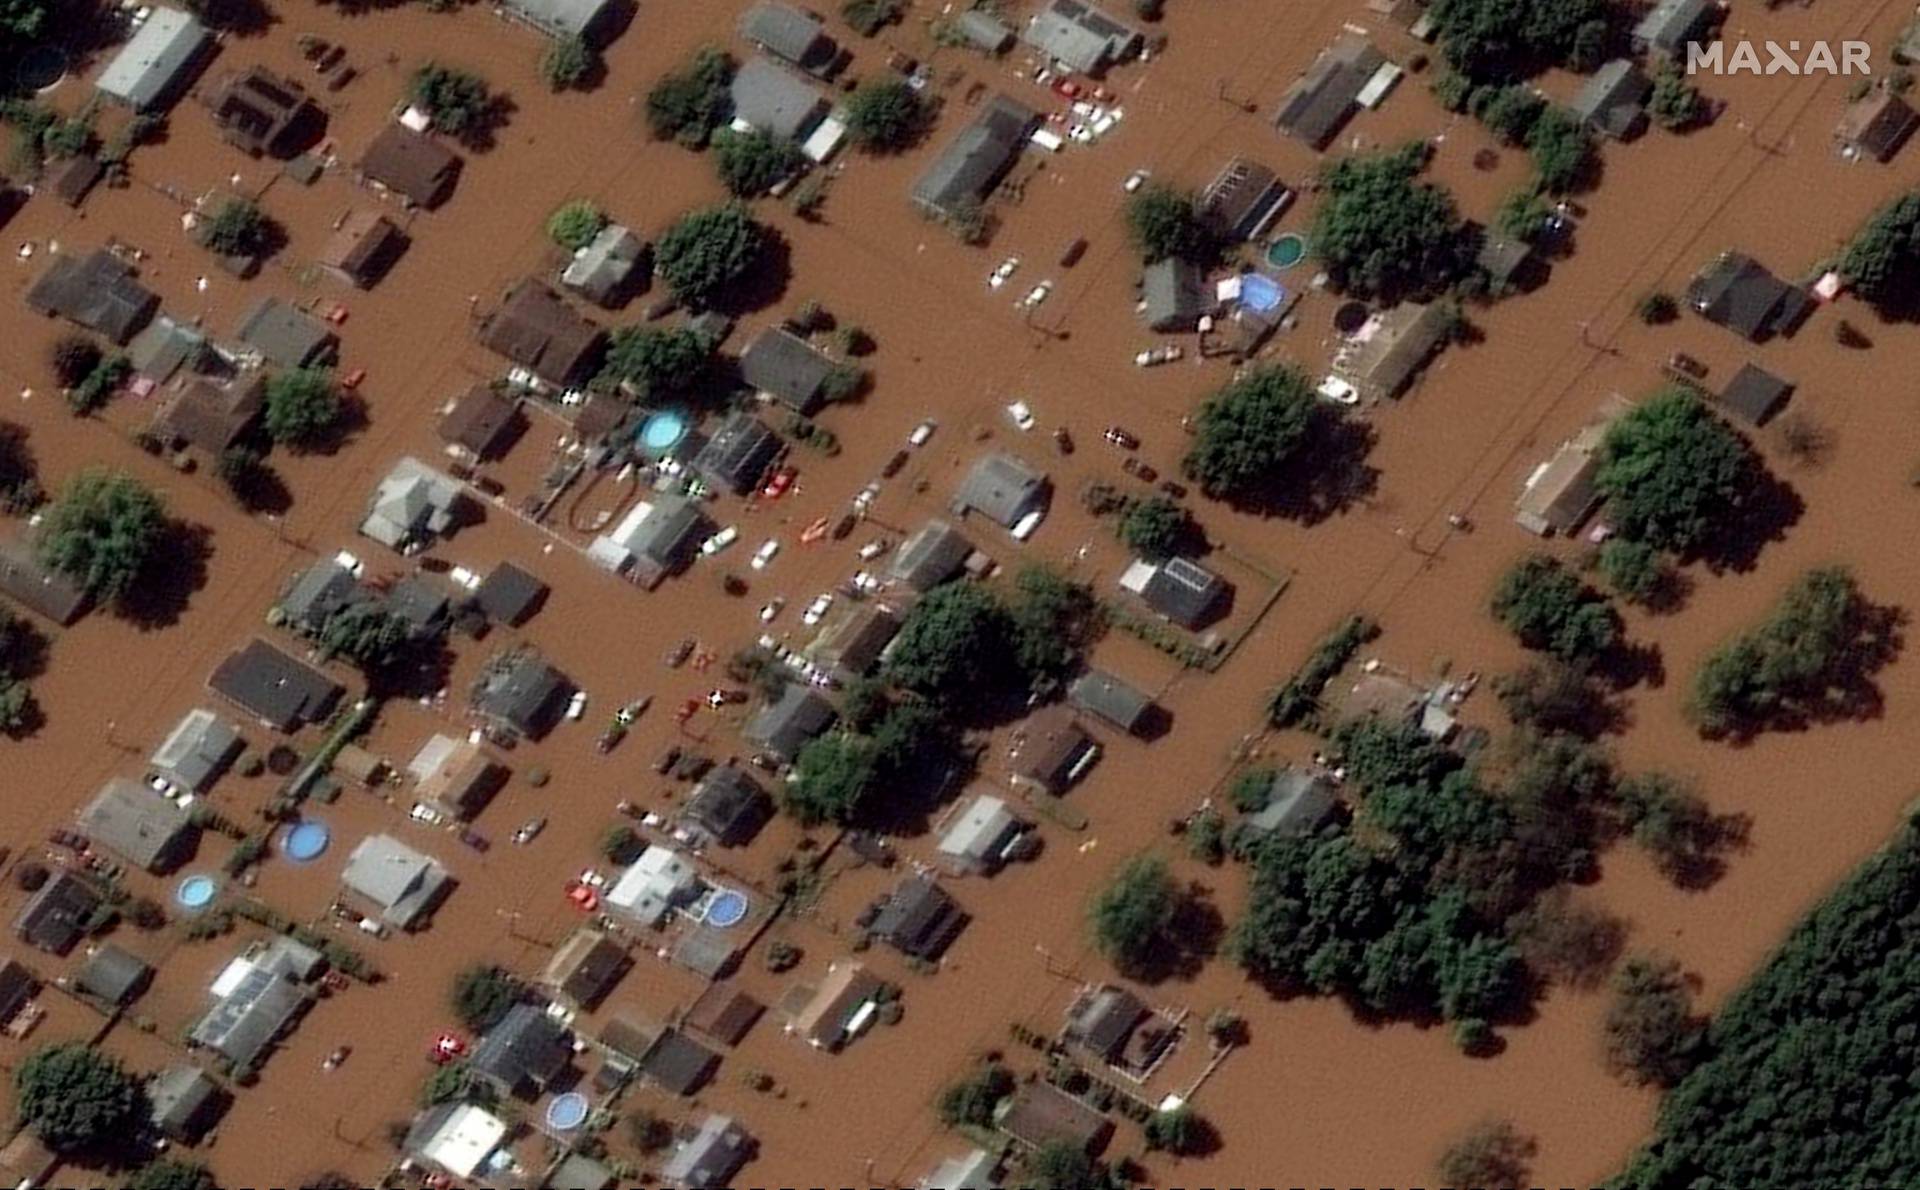 A satellite image shows houses submerged in floods caused by torrential rains unleashed by the remnants of Hurricane Ida, in Manville, New Jersey